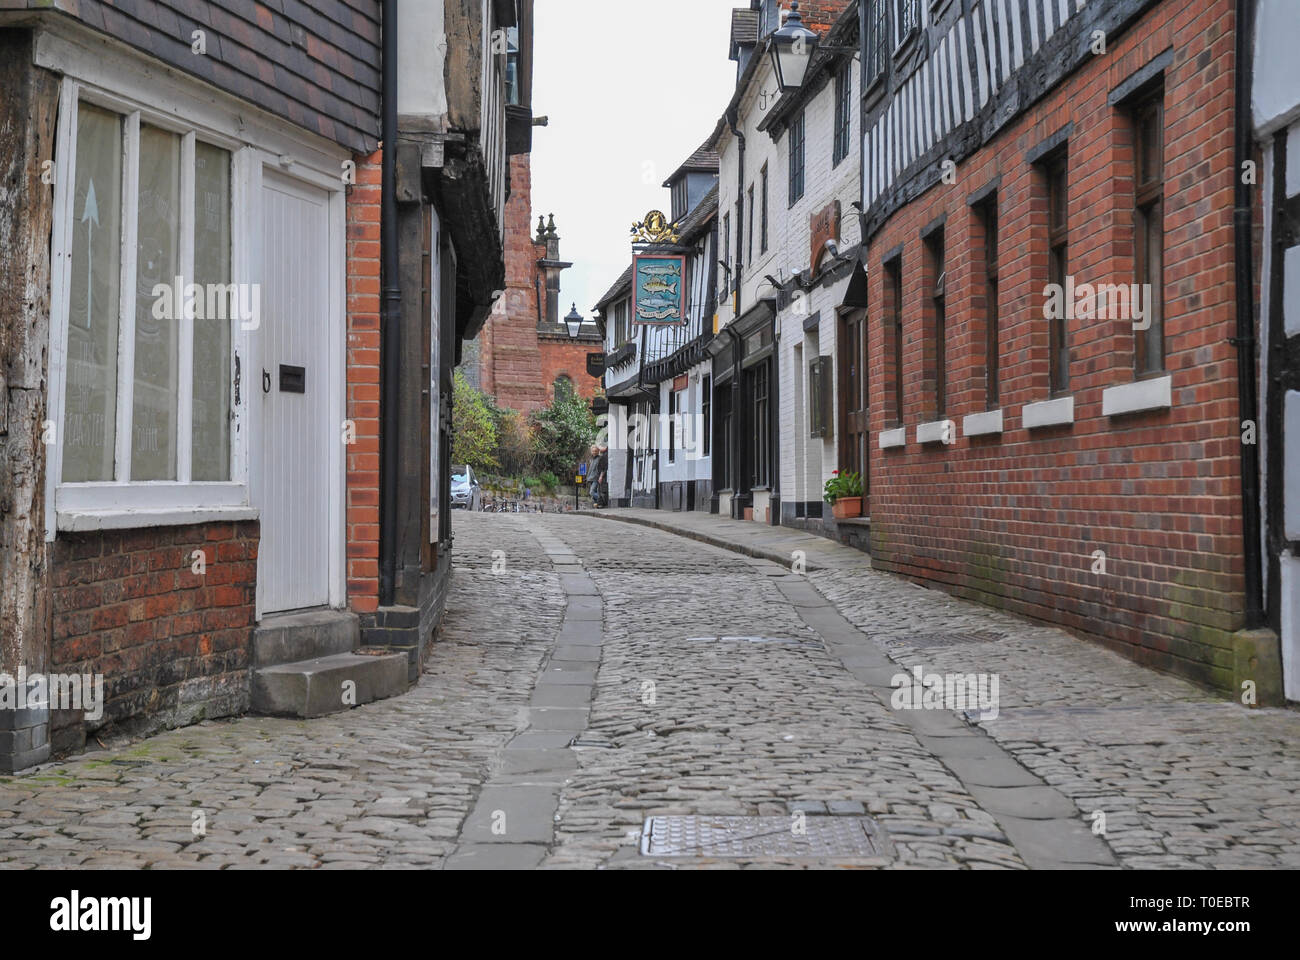 Fish Street in Shrewsbury showing old cobble stones and cart way Stock Photo